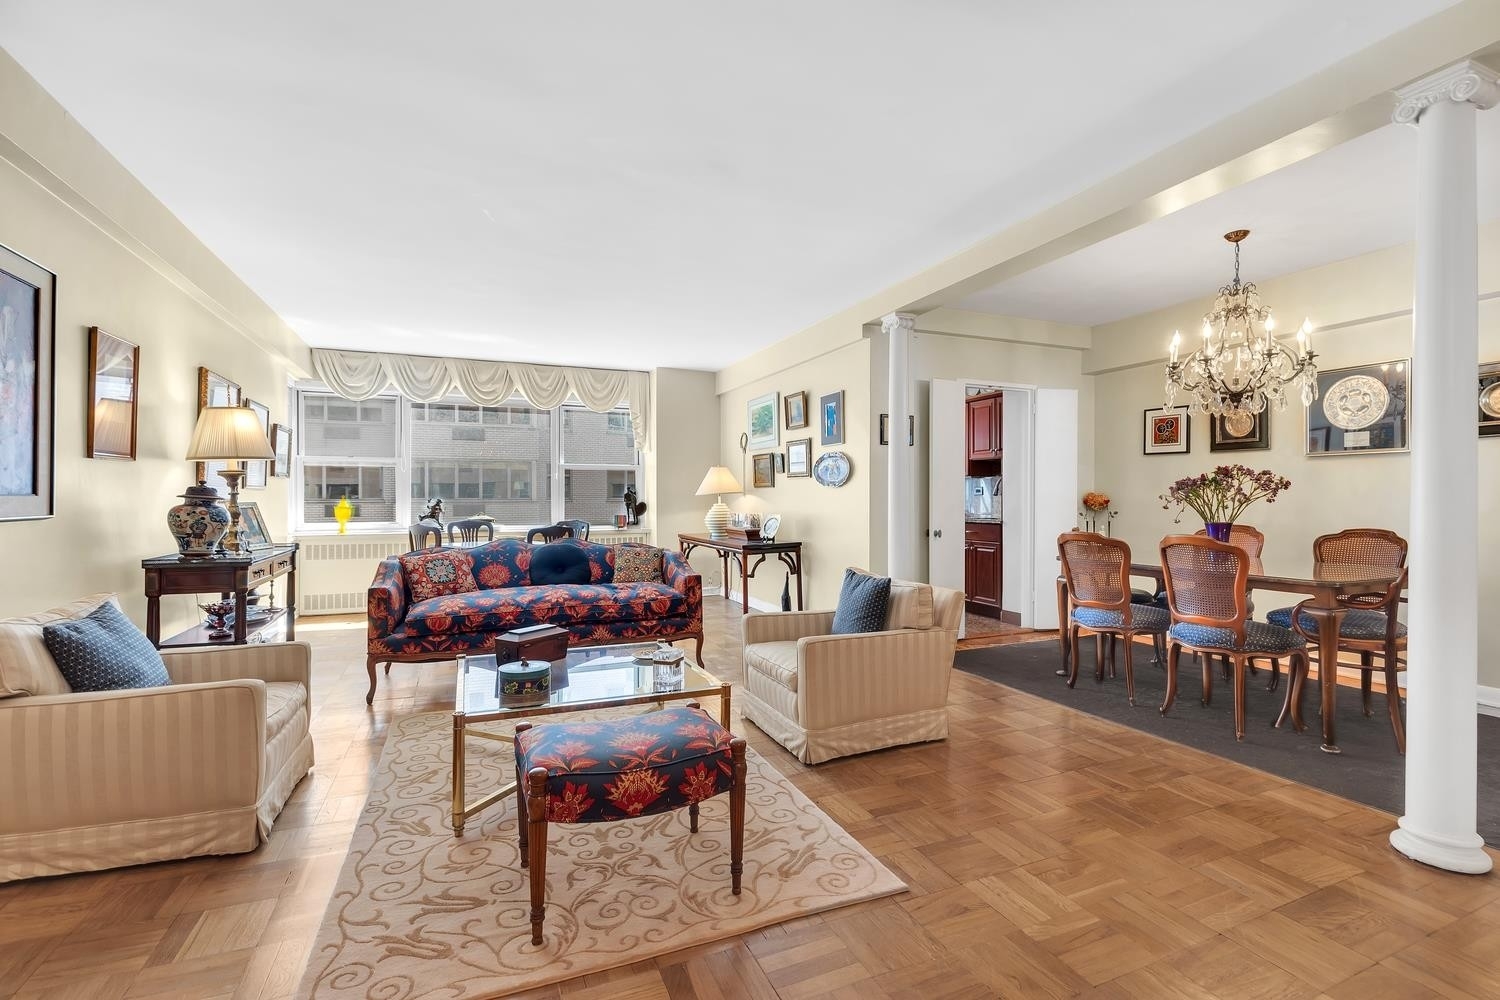 Co-op Properties for Sale at 25 SUTTON PL S, 10O Sutton Place, New York, New York 10022